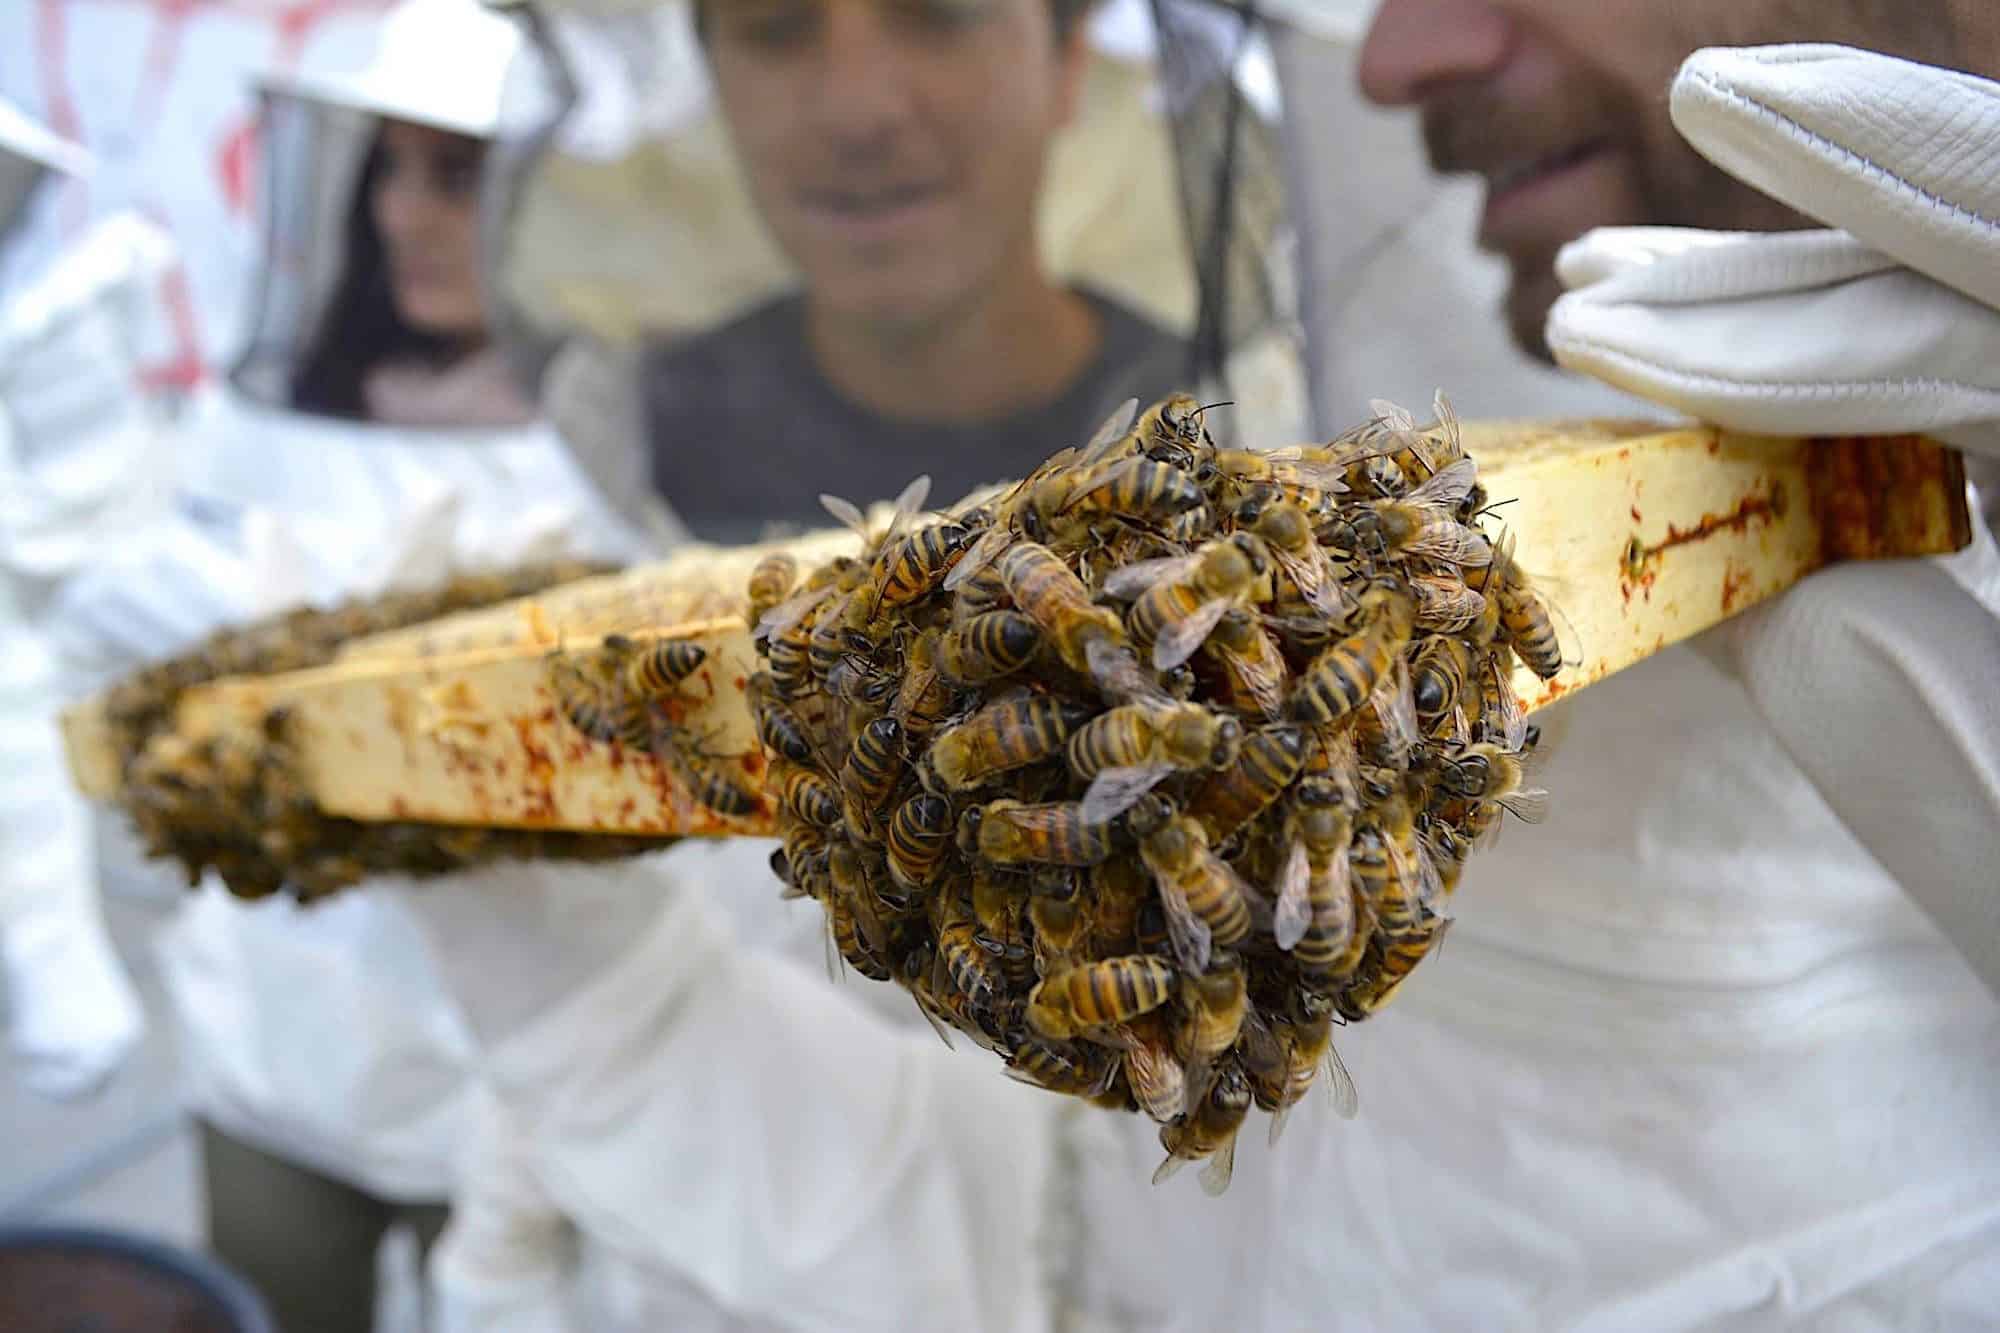 Bees from a hive with beekeepers in their protective suits in the background.